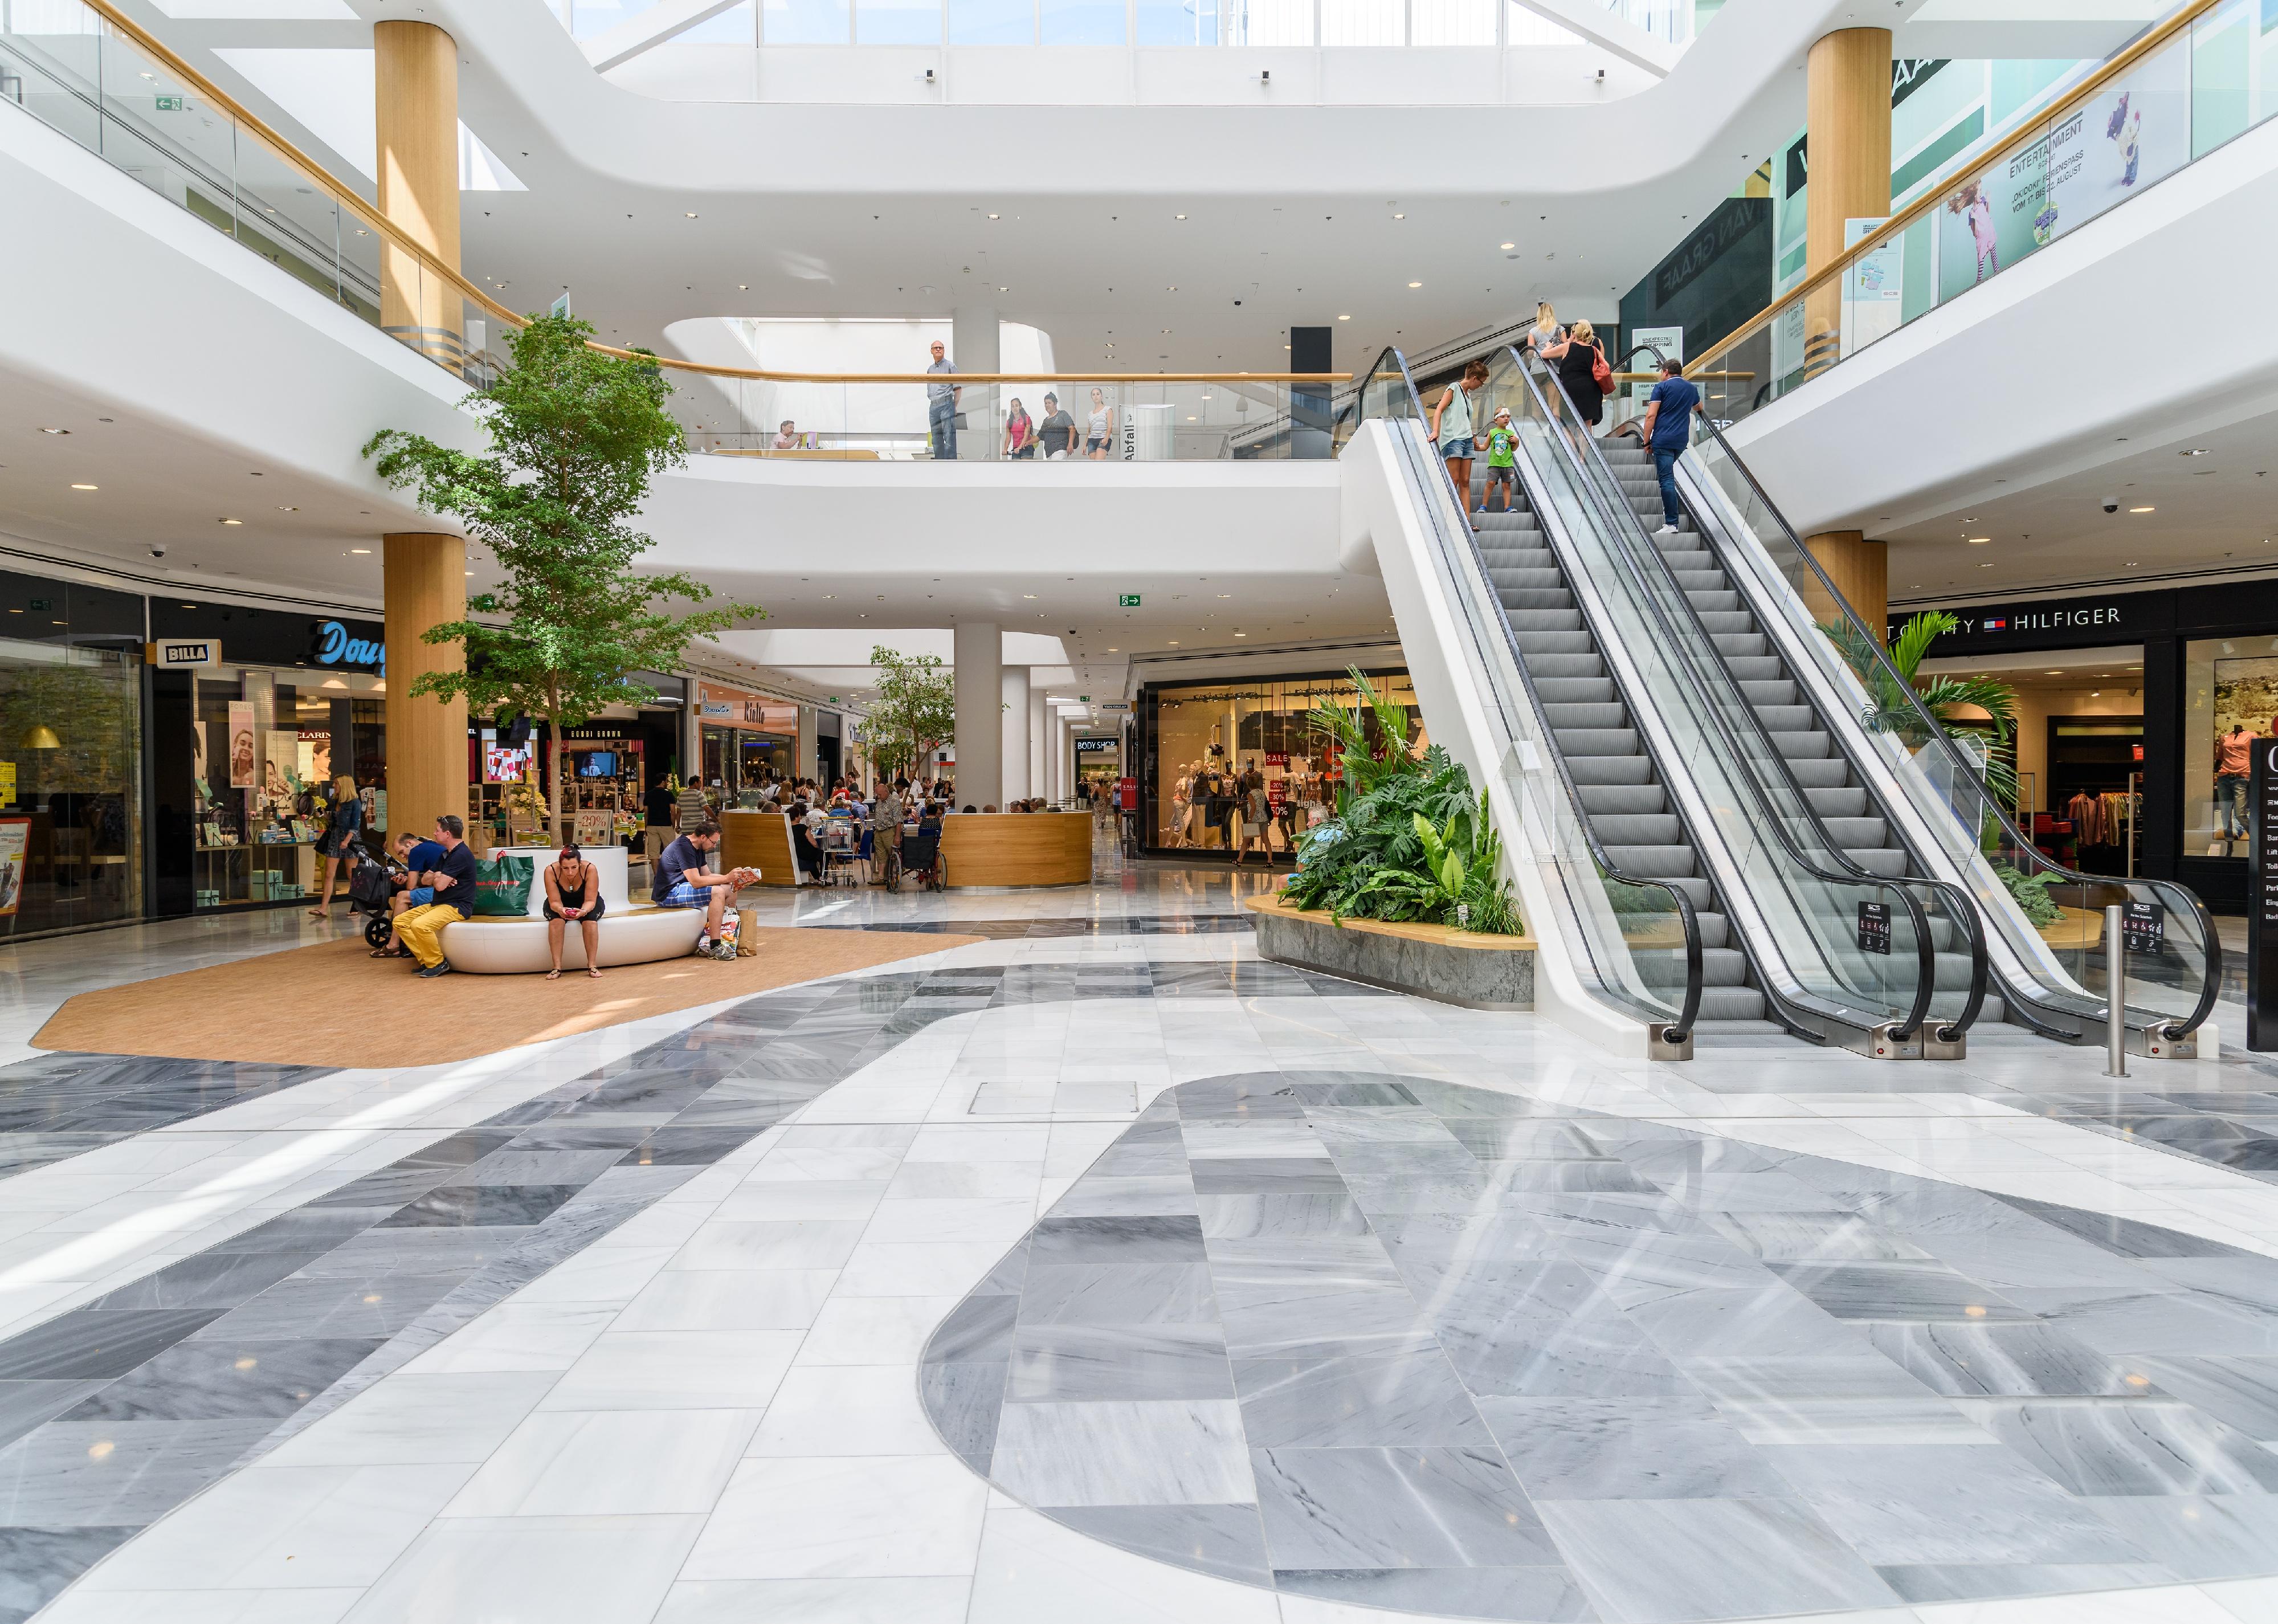 Interior of a shopping mall with escalators.